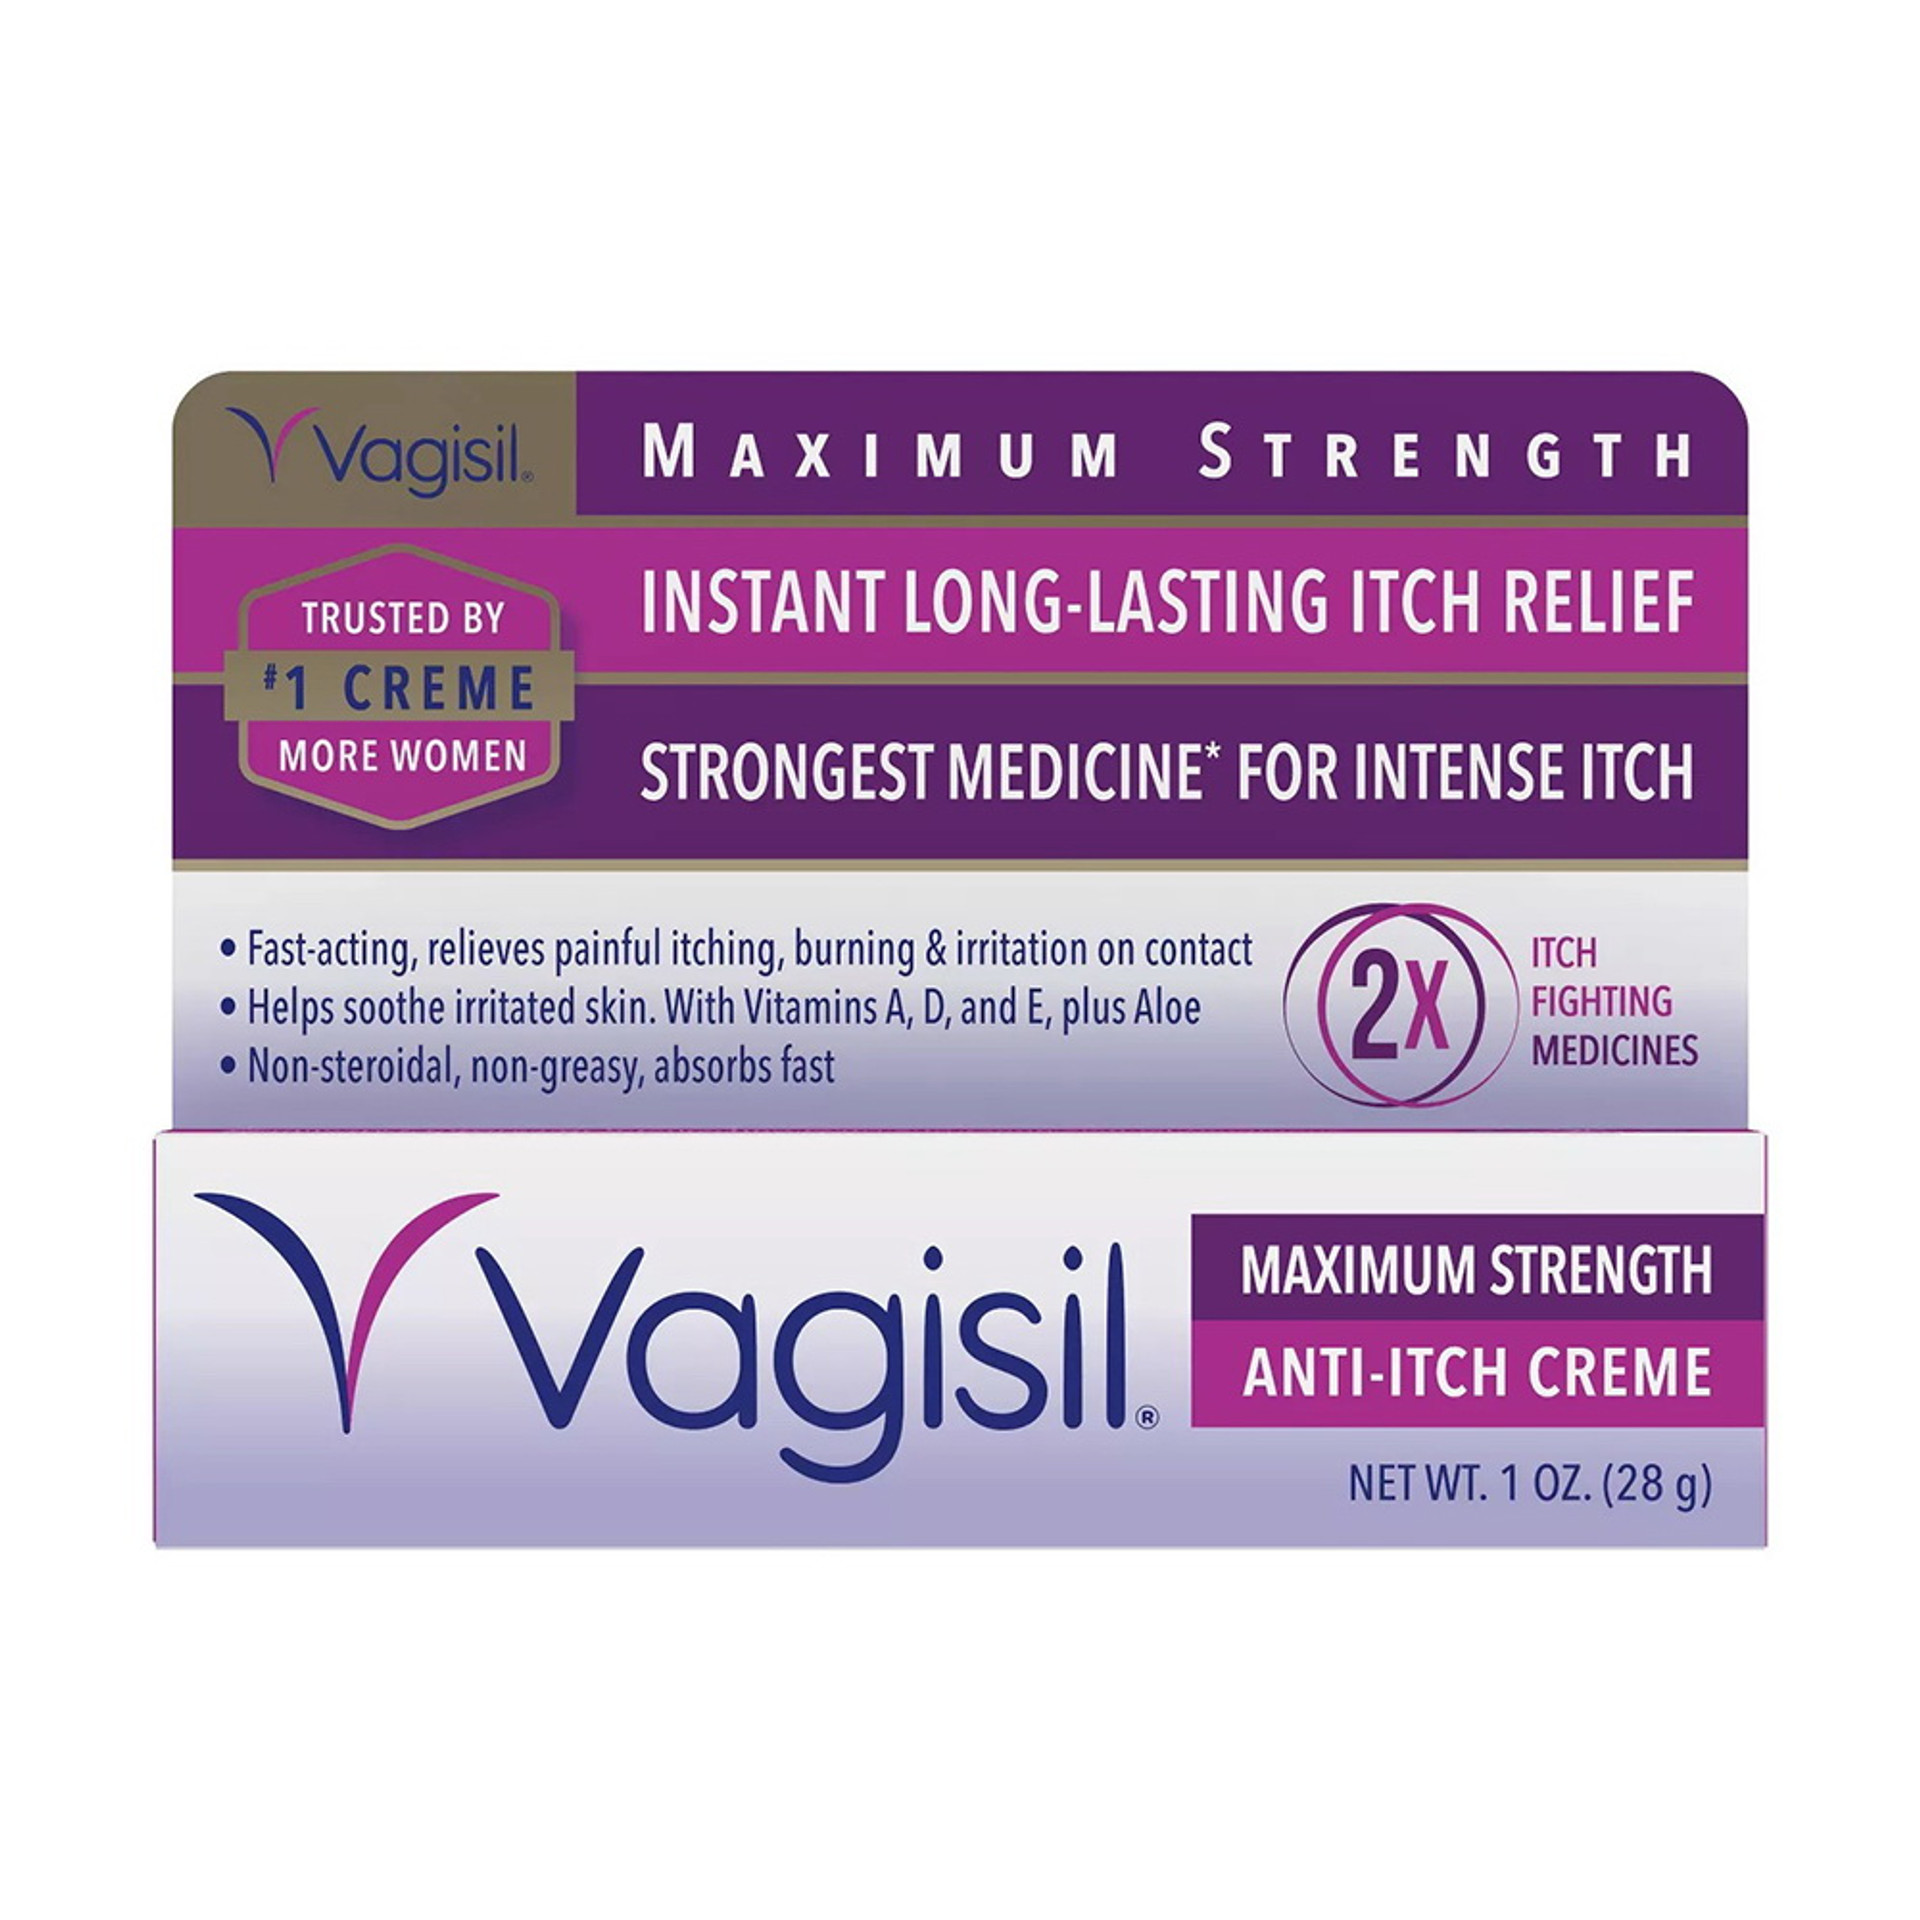 Vagisil Anti Itch Creme Long Lasting Itch Relief Maximum Strength 1 8323